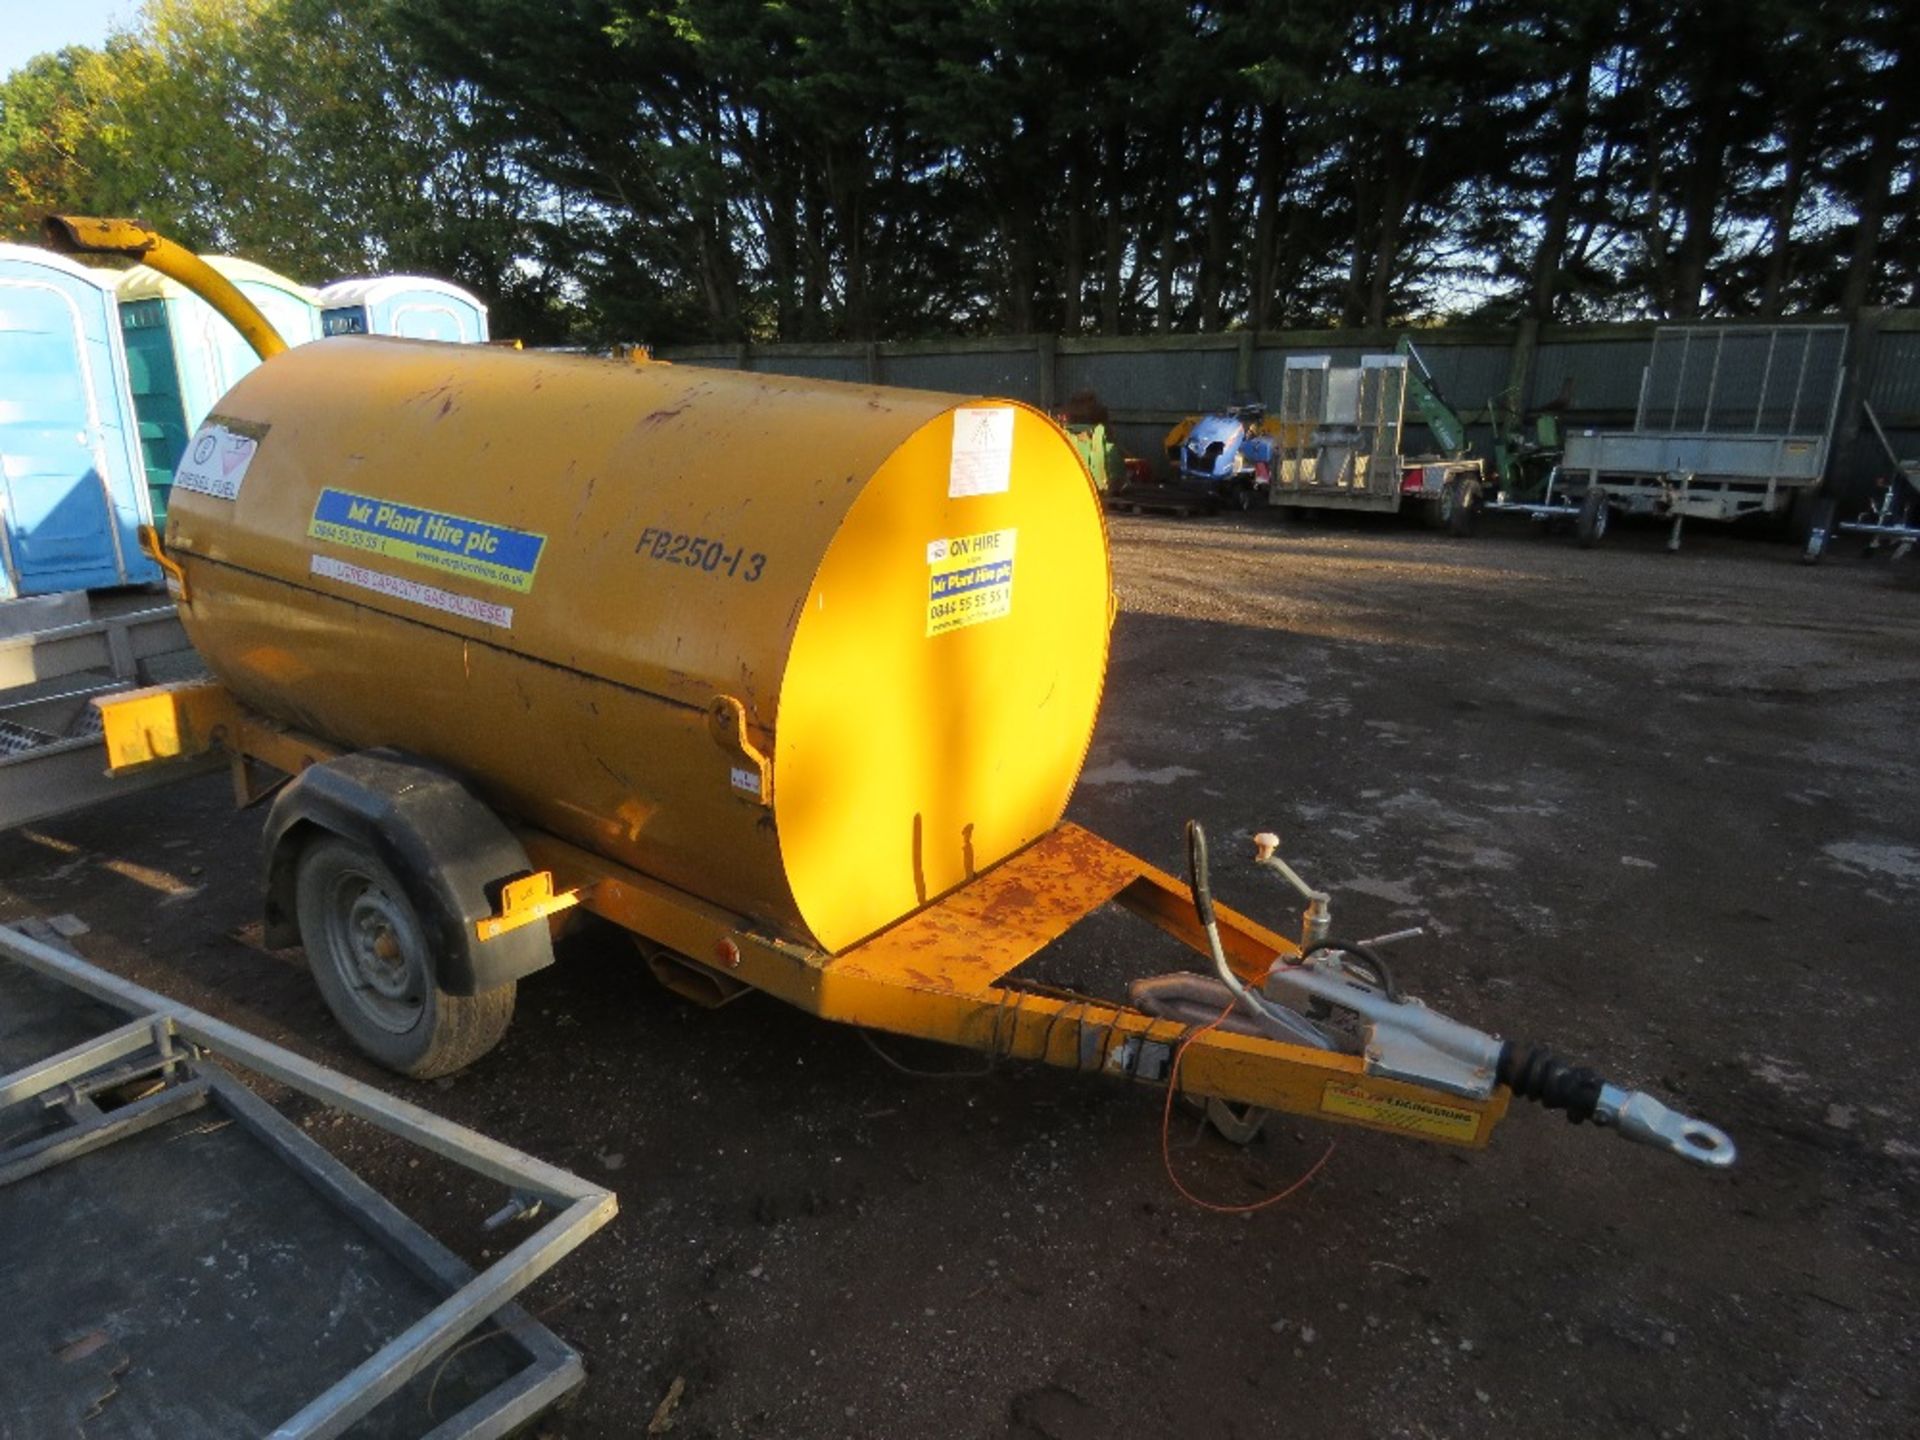 TRAILER ENGINEERING 950 LITRE DIESEL BOWSER, WITH PUMP AND HOSE. FAST TOW, RING HITCH FITTED. - Image 3 of 7